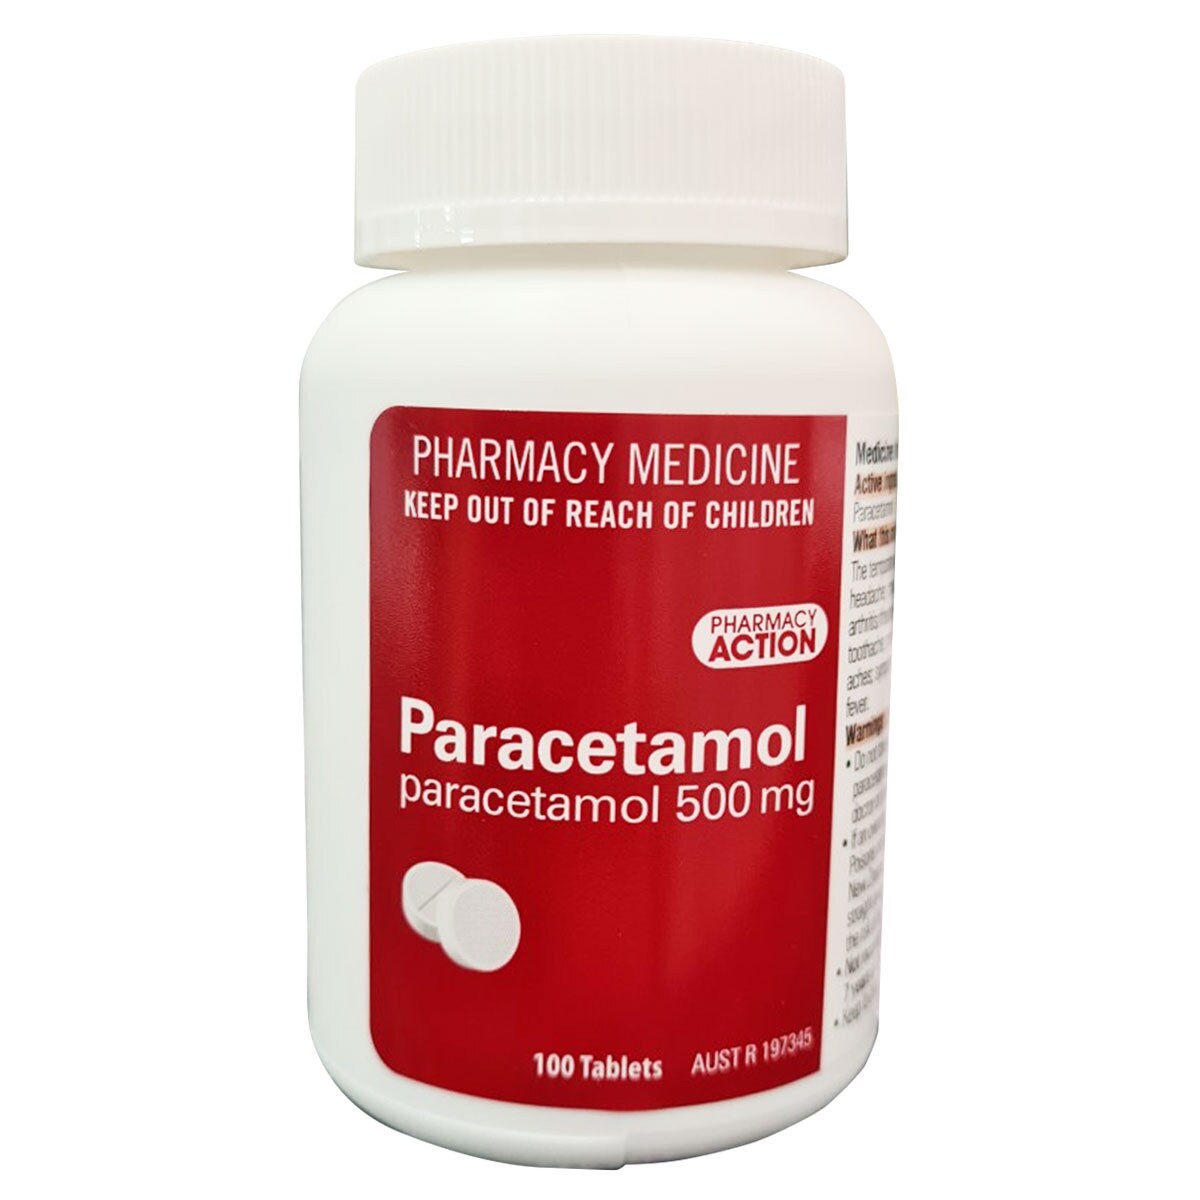 Pharmacy Action Paracetamol (500mg) Pain Relief 100 Tablets